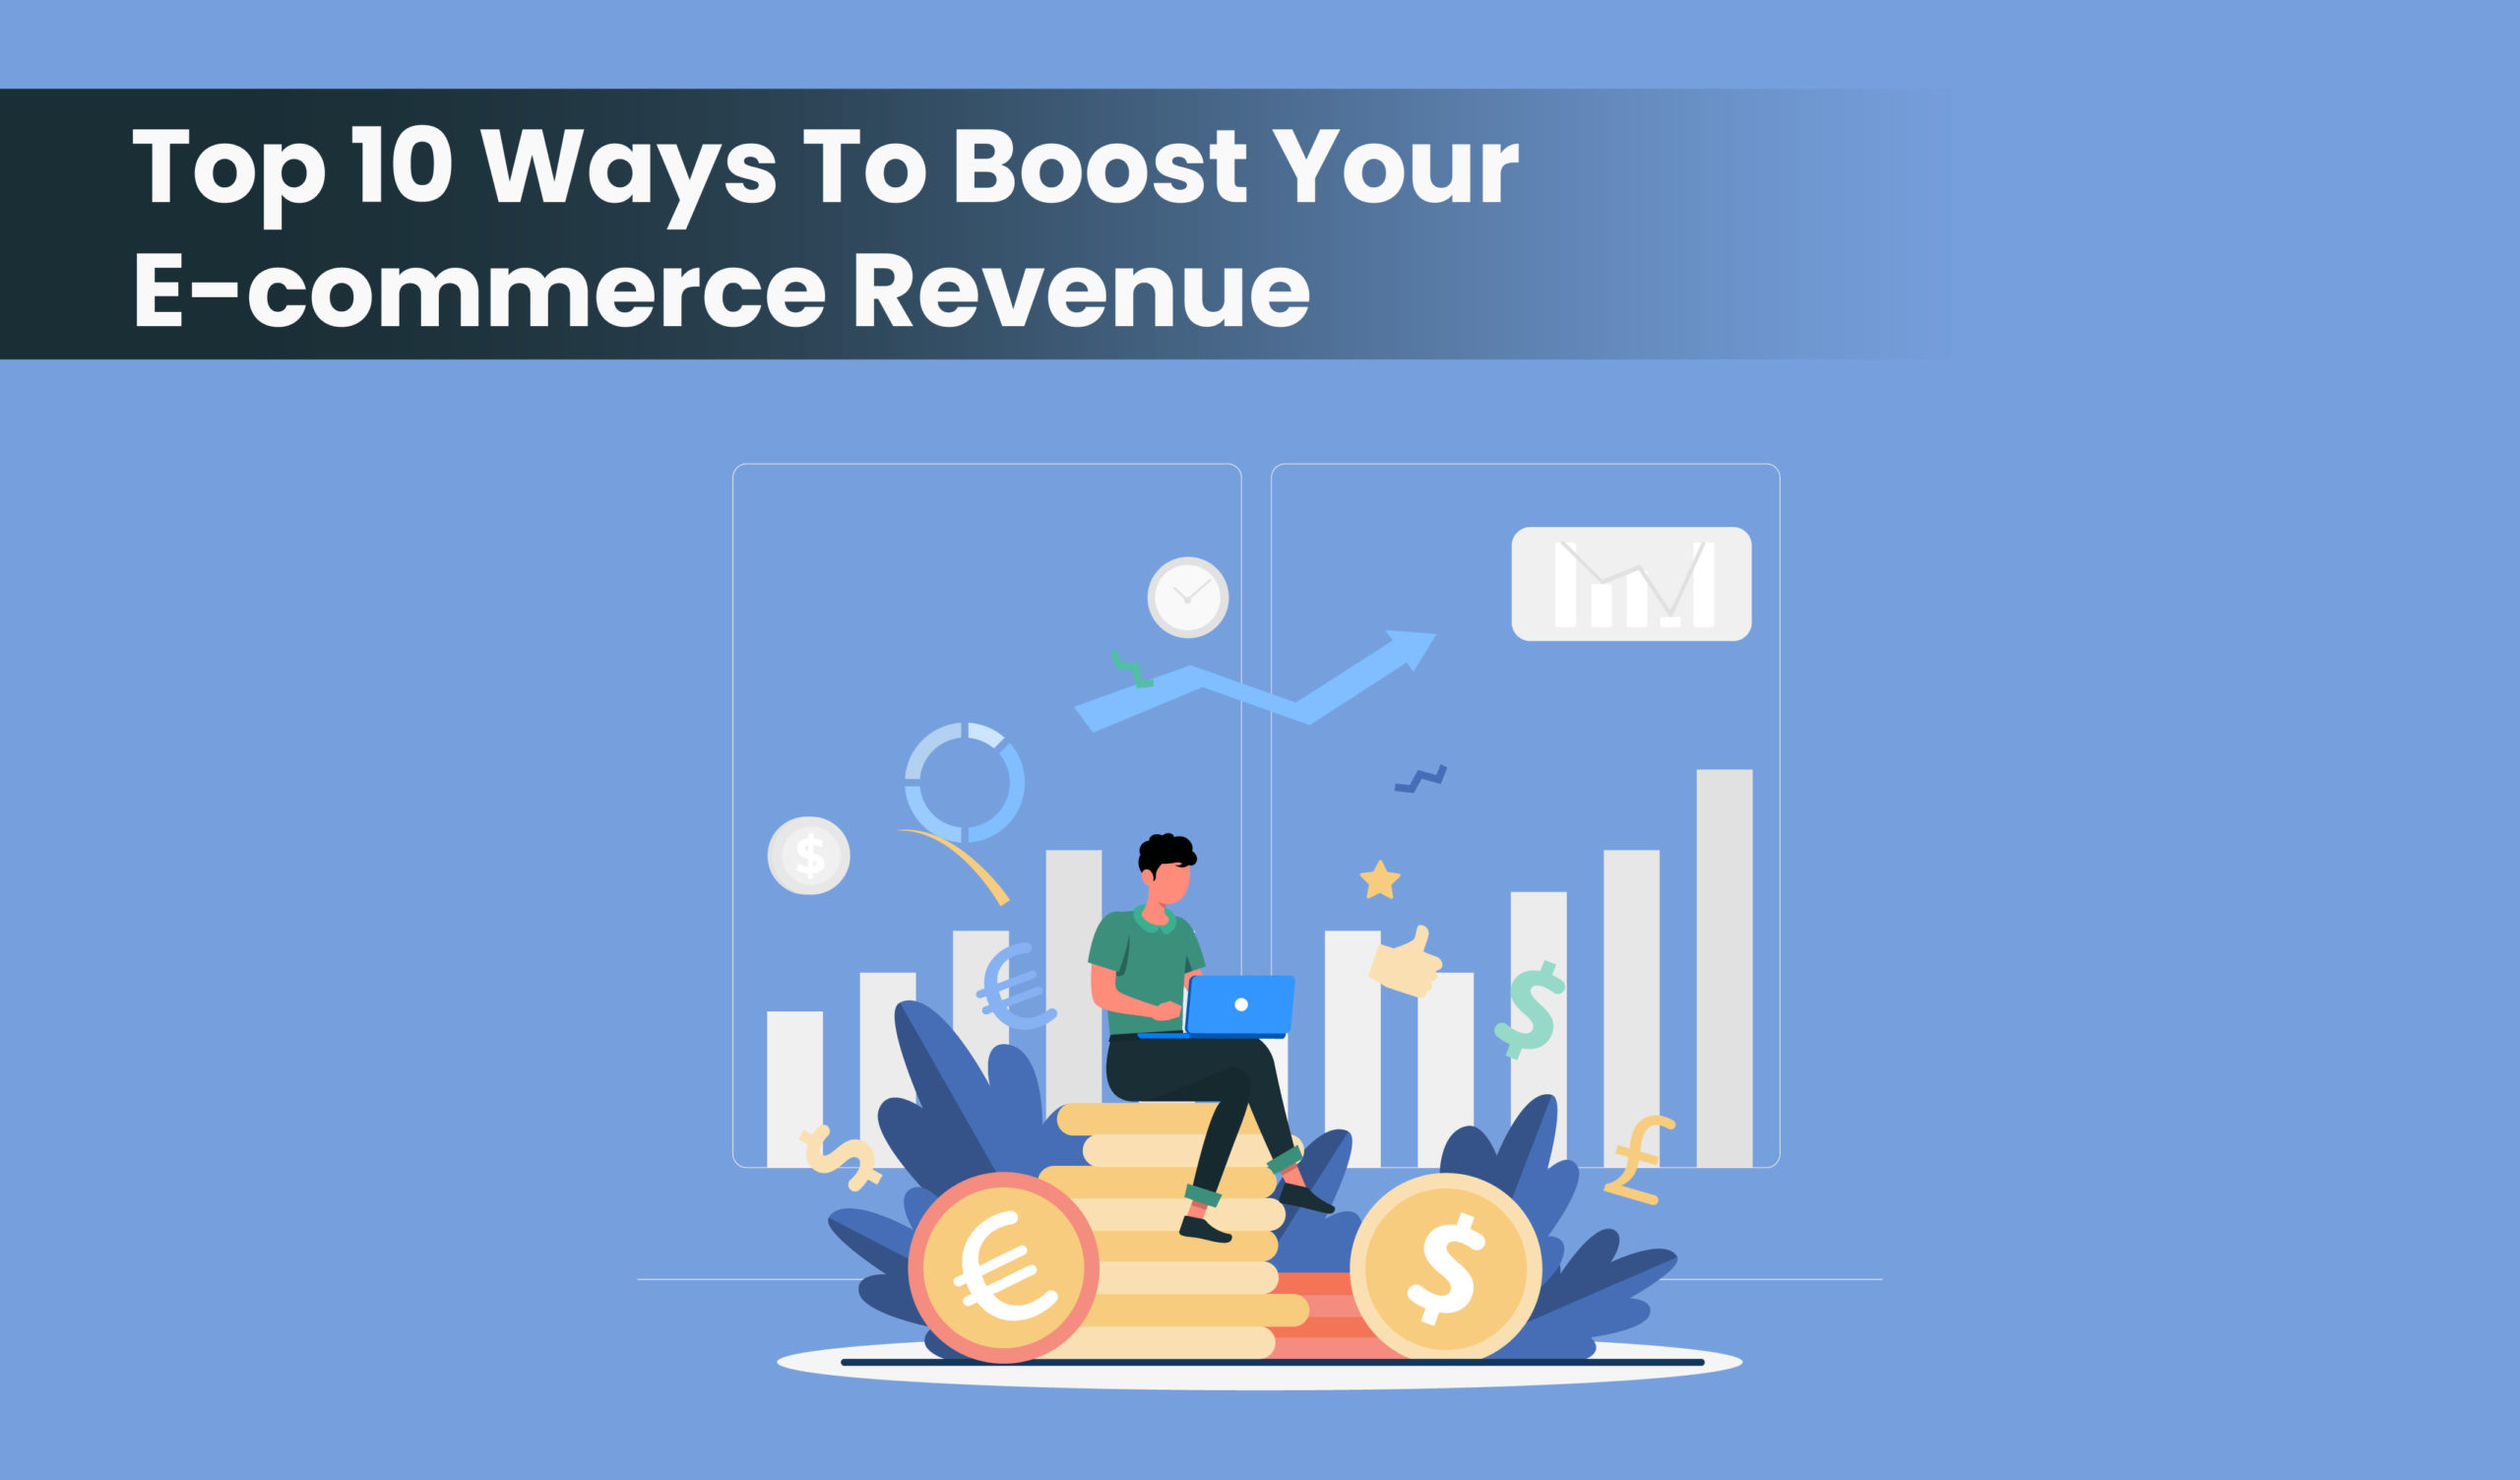 Top 10 proven ways to boost your e-commerce revenue